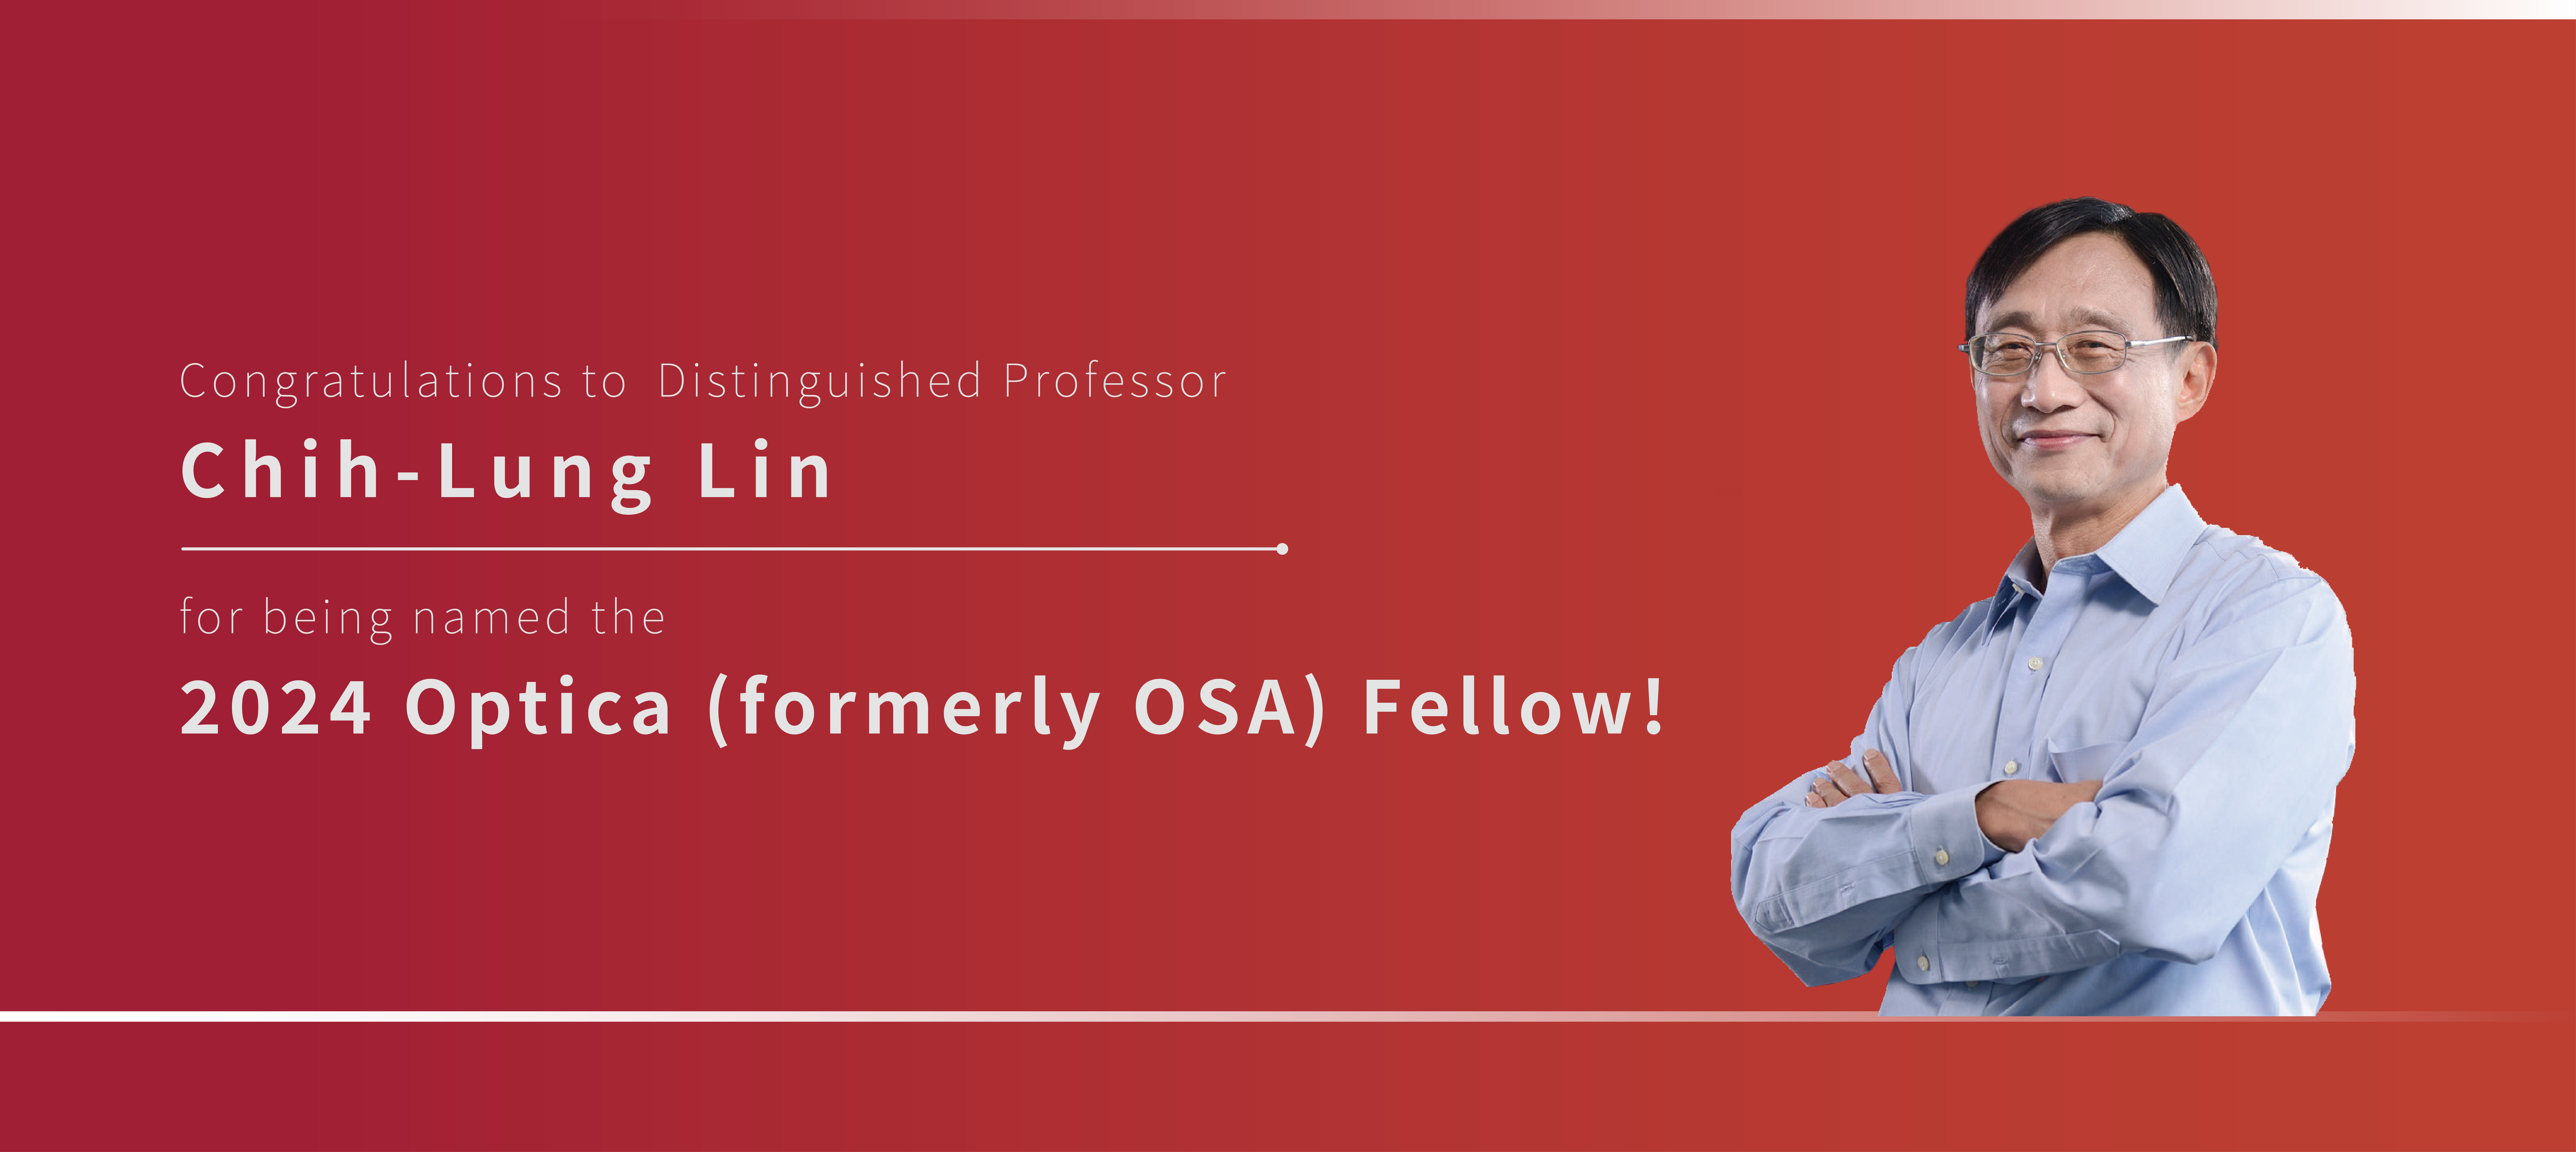 Congratulations to Distinguished Professor Chih-Lung Lin for being named the 2024 Optica (formerly OSA) Fellow!